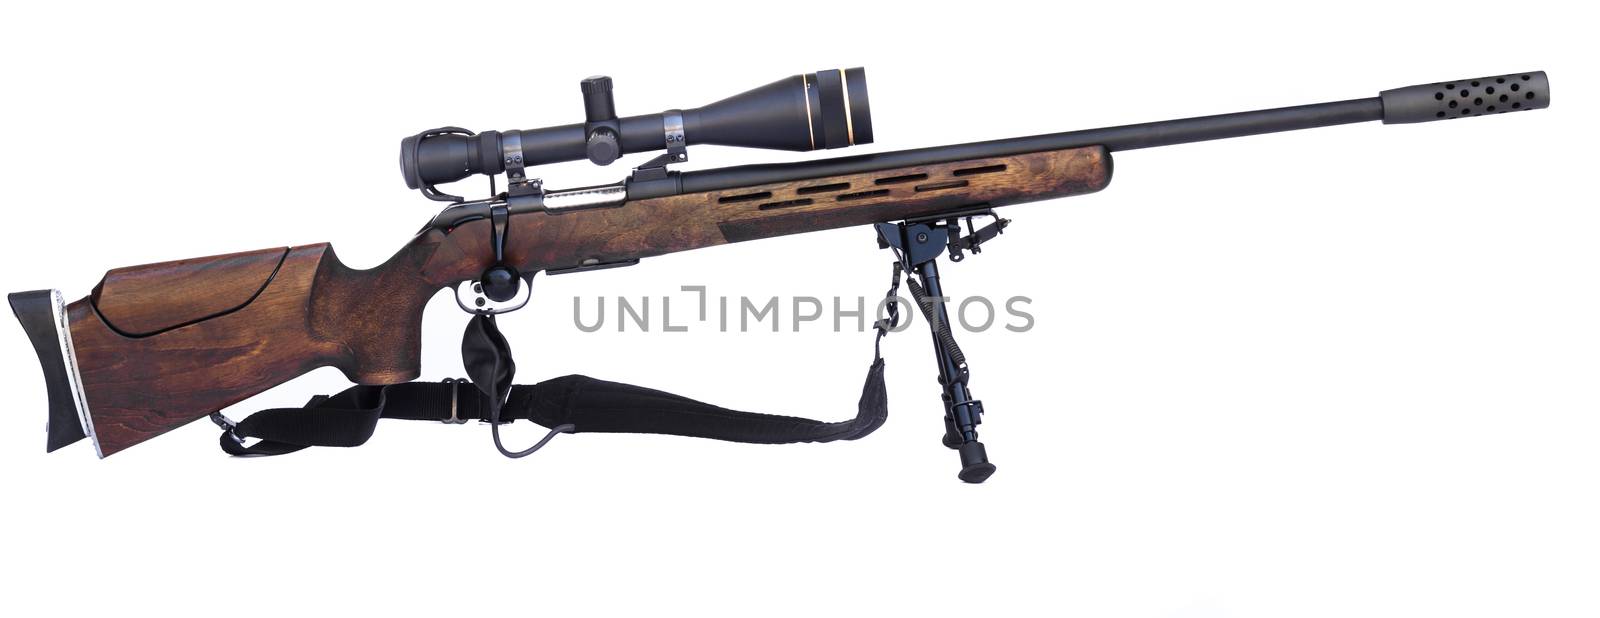 Sniper Rifle with scope atached on a tripod isolated on white background